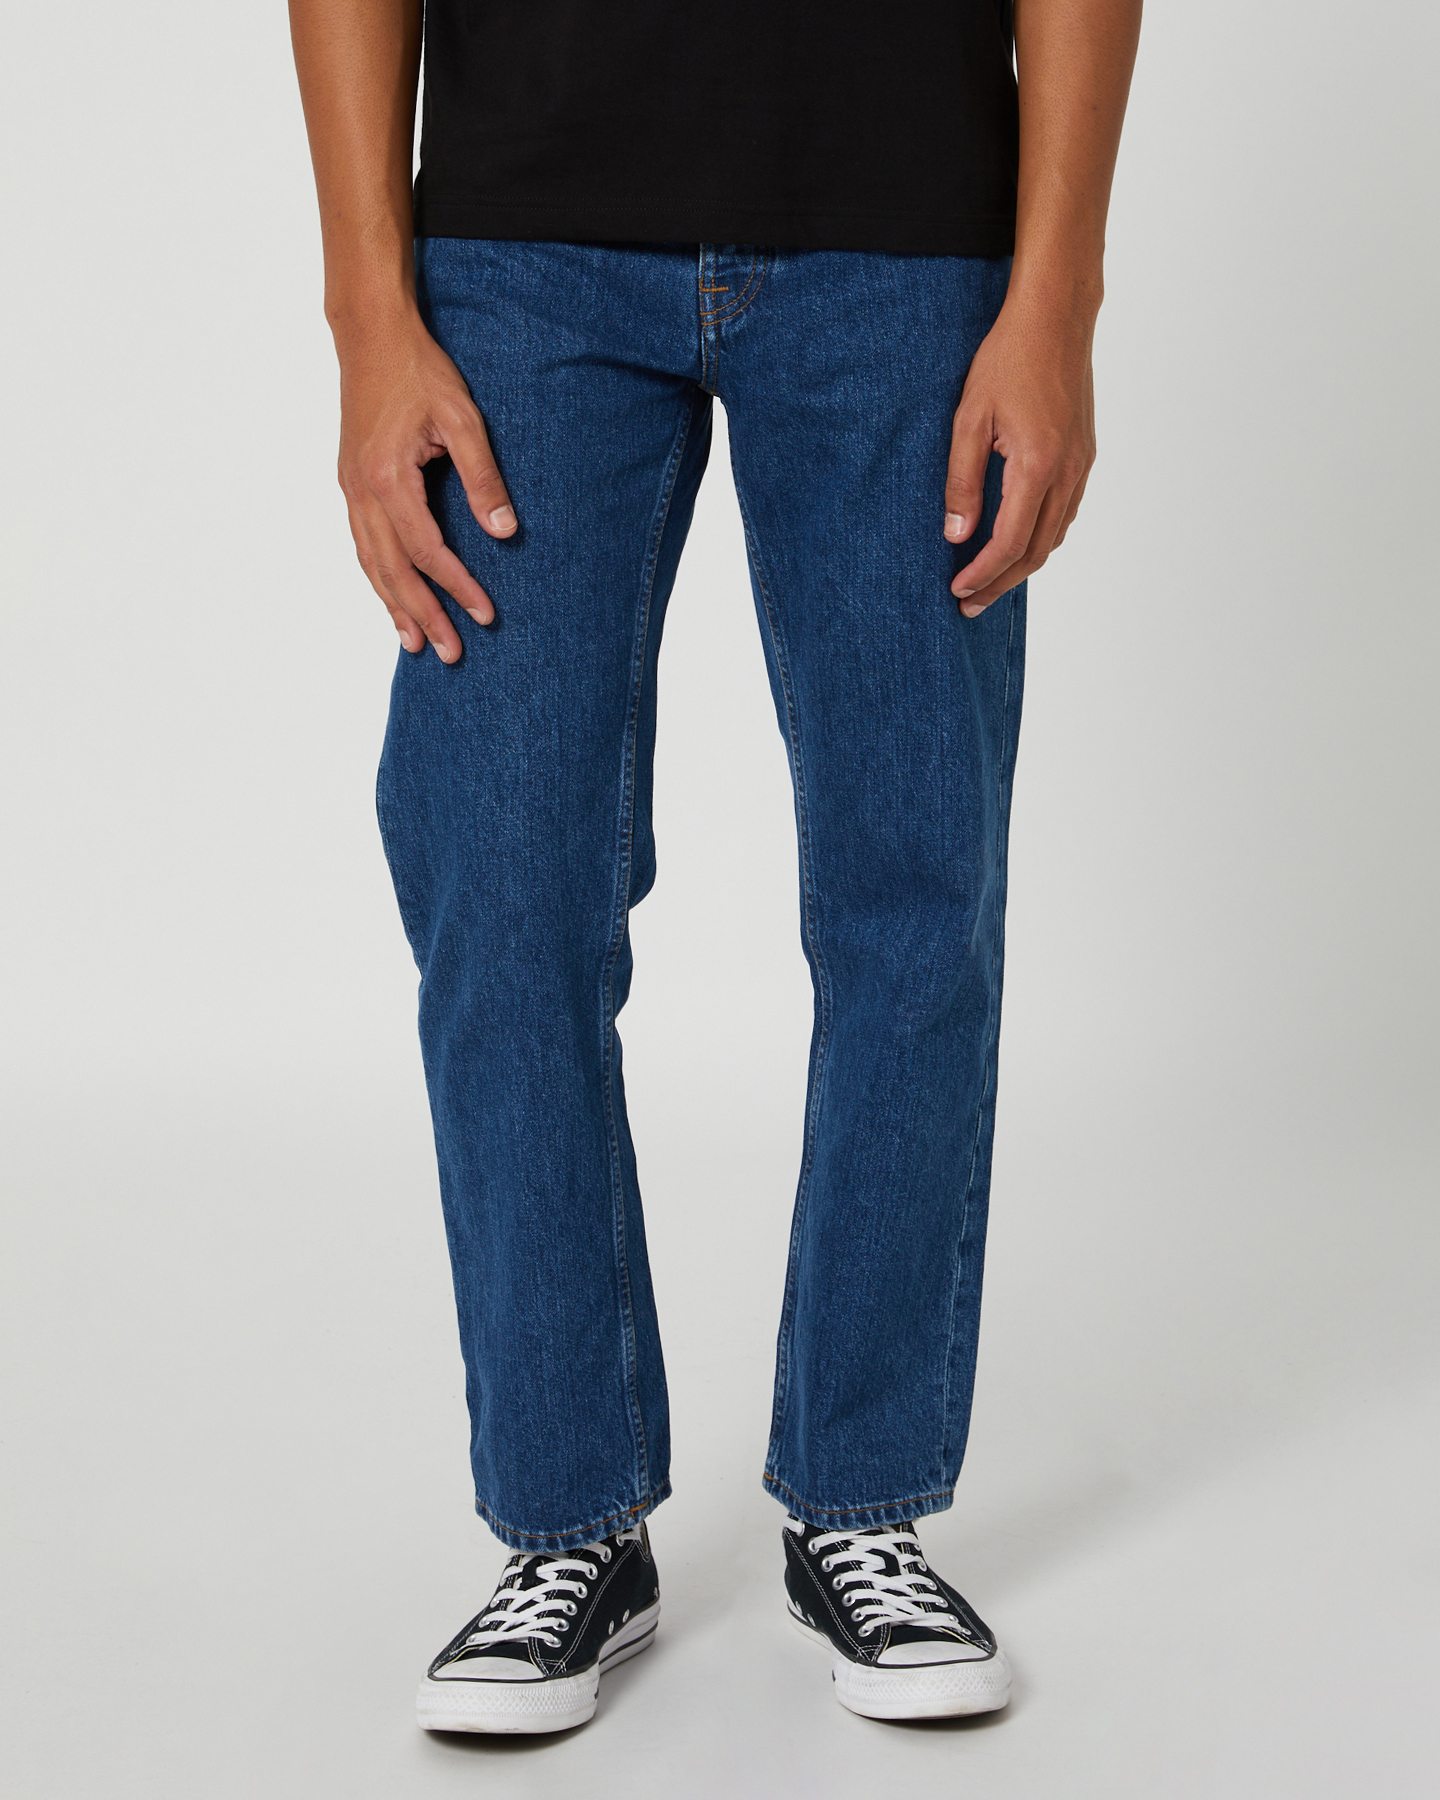 Nudie Jeans Co Rad Rufus Mens Jean - Monday Blues | SurfStitch